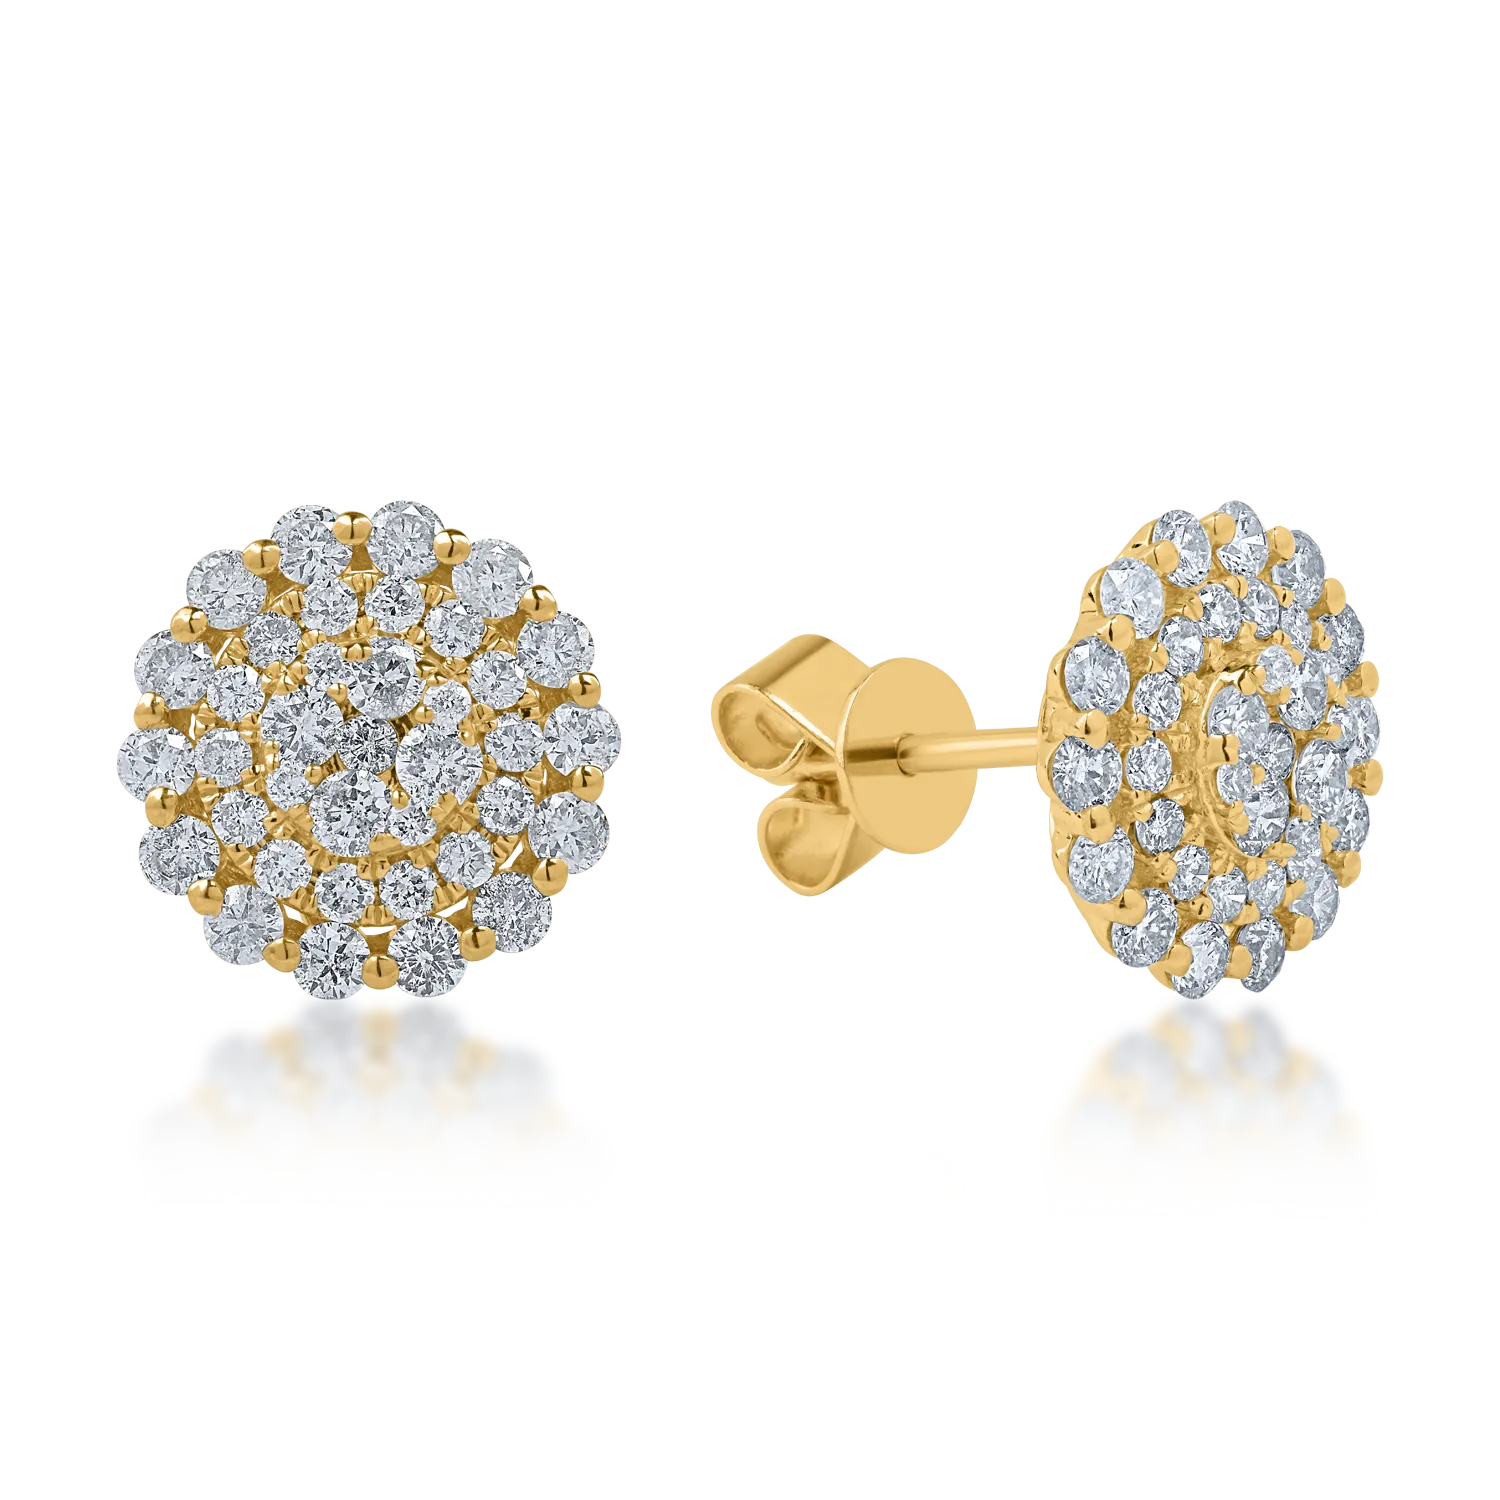 Yellow gold earrings with 1.35ct diamonds